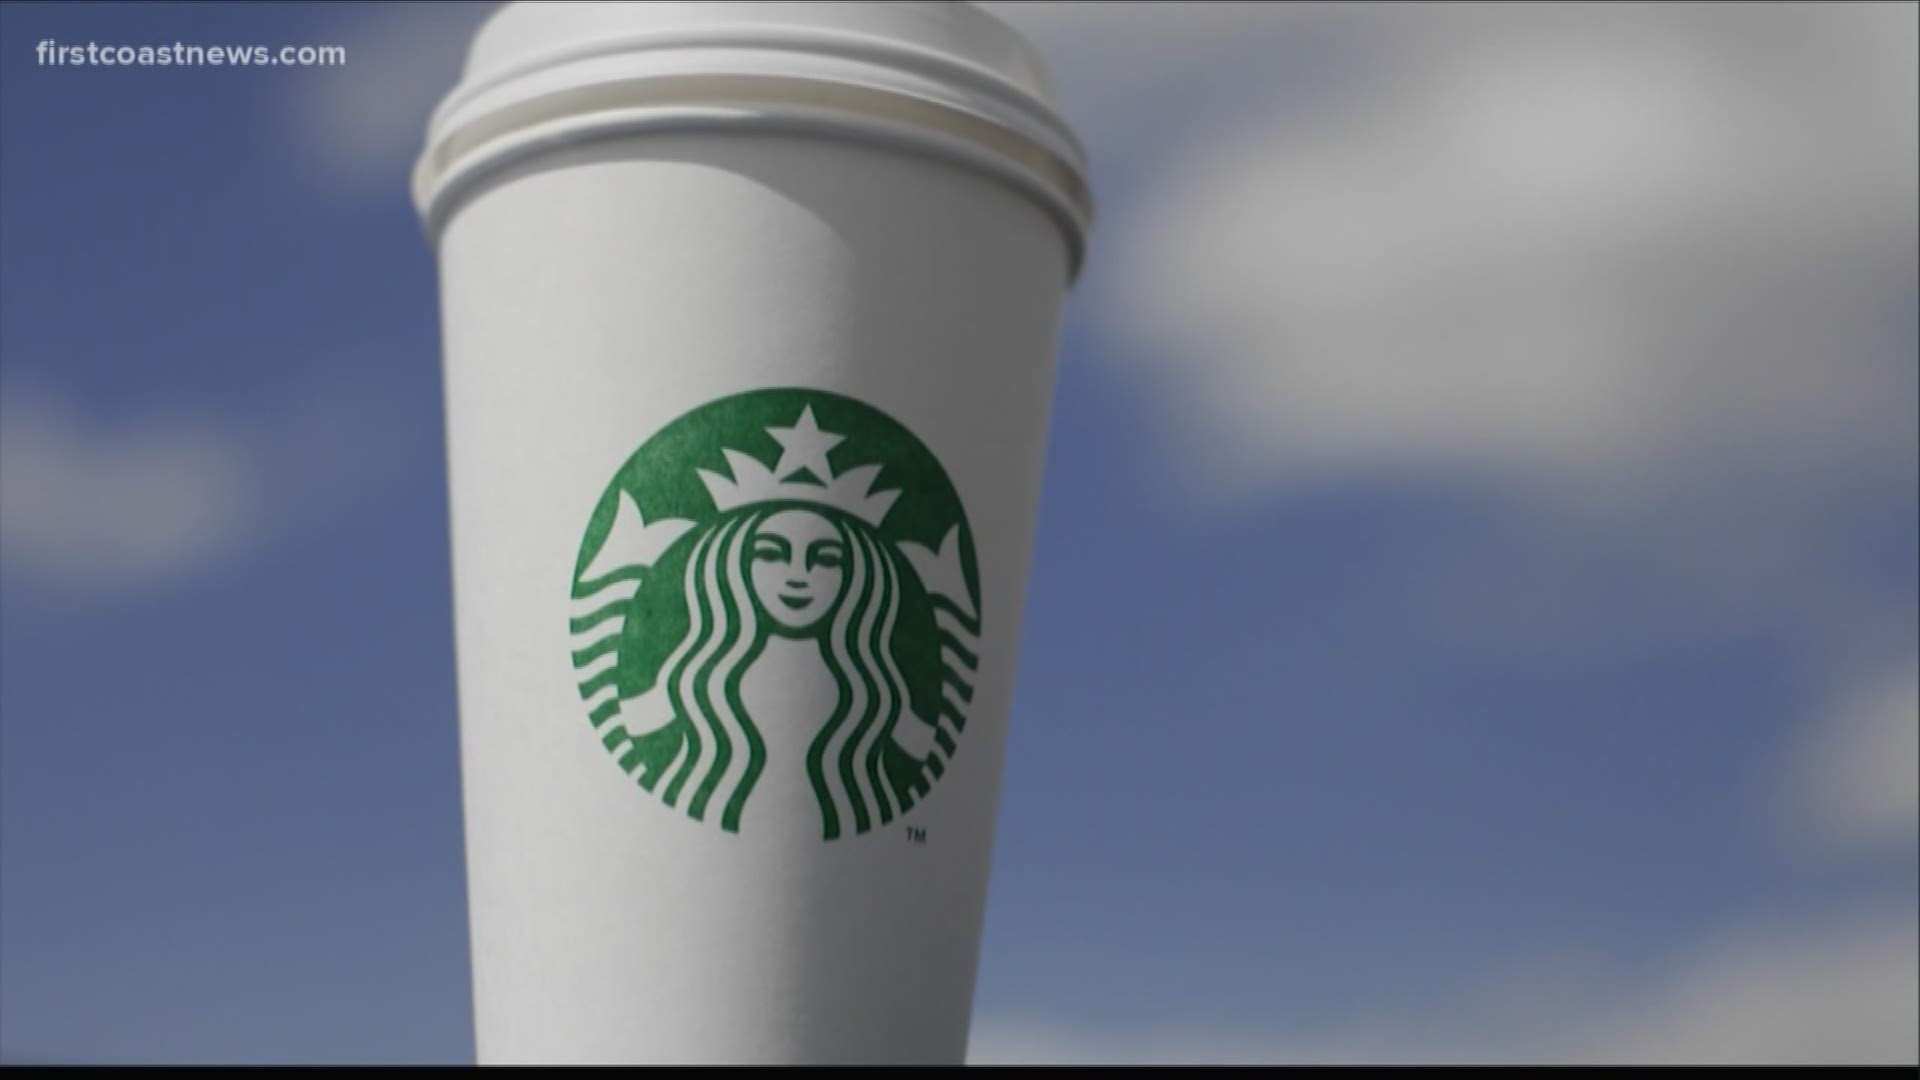 Big changes might be in store for Starbucks.